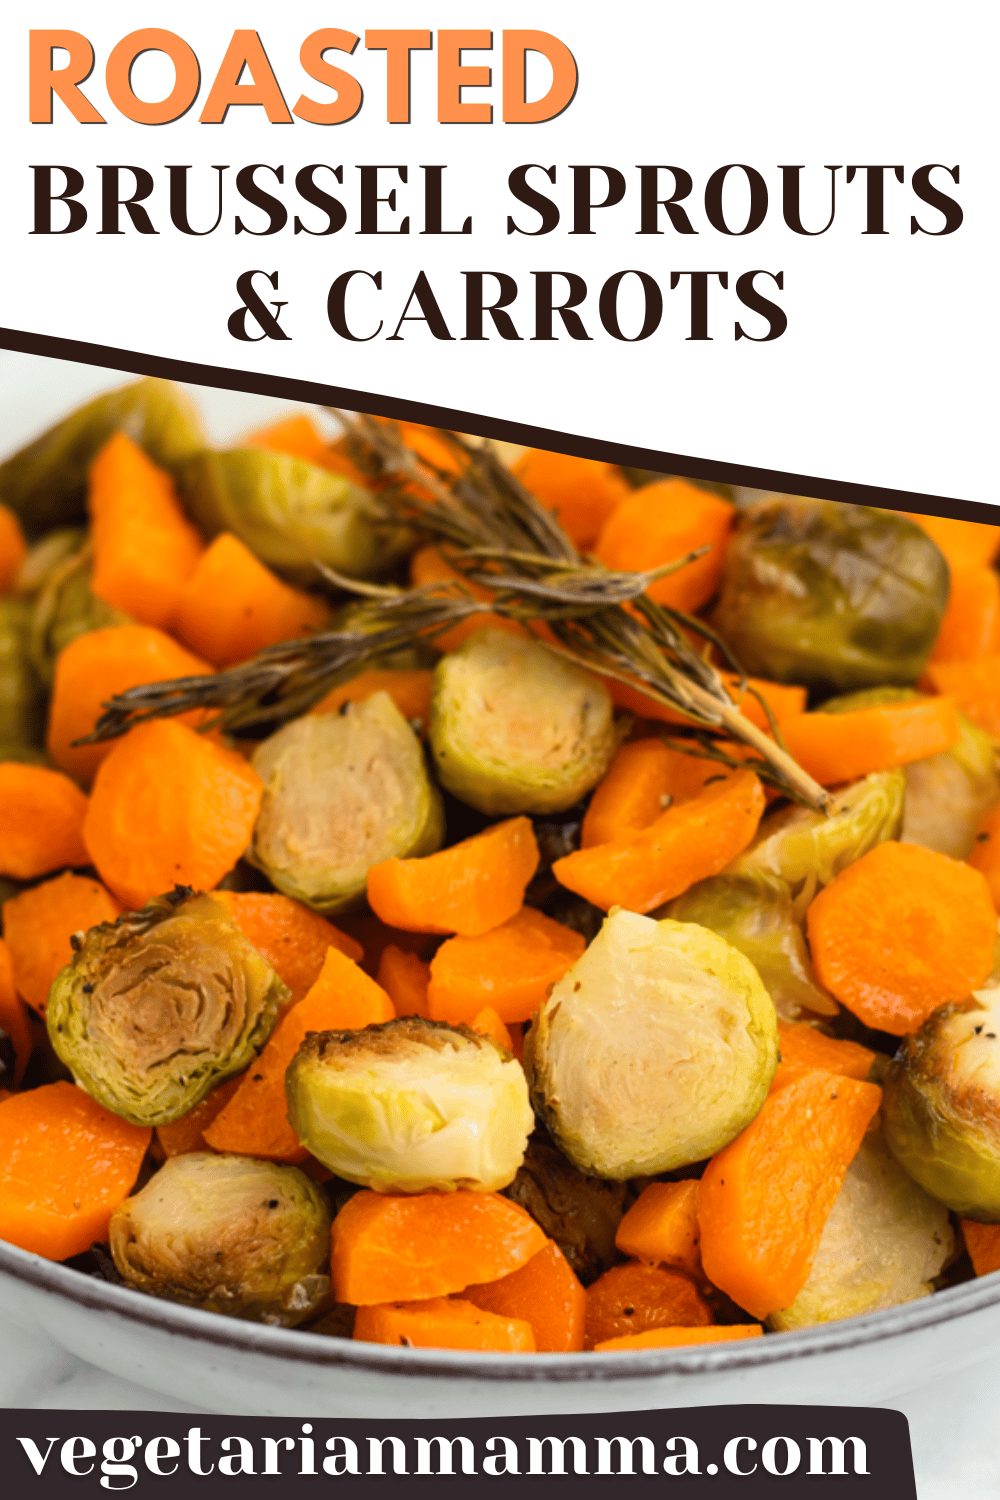 Roasted Brussel Sprouts and Carrots with fresh thyme is the perfect warm and savory side dish for fall!